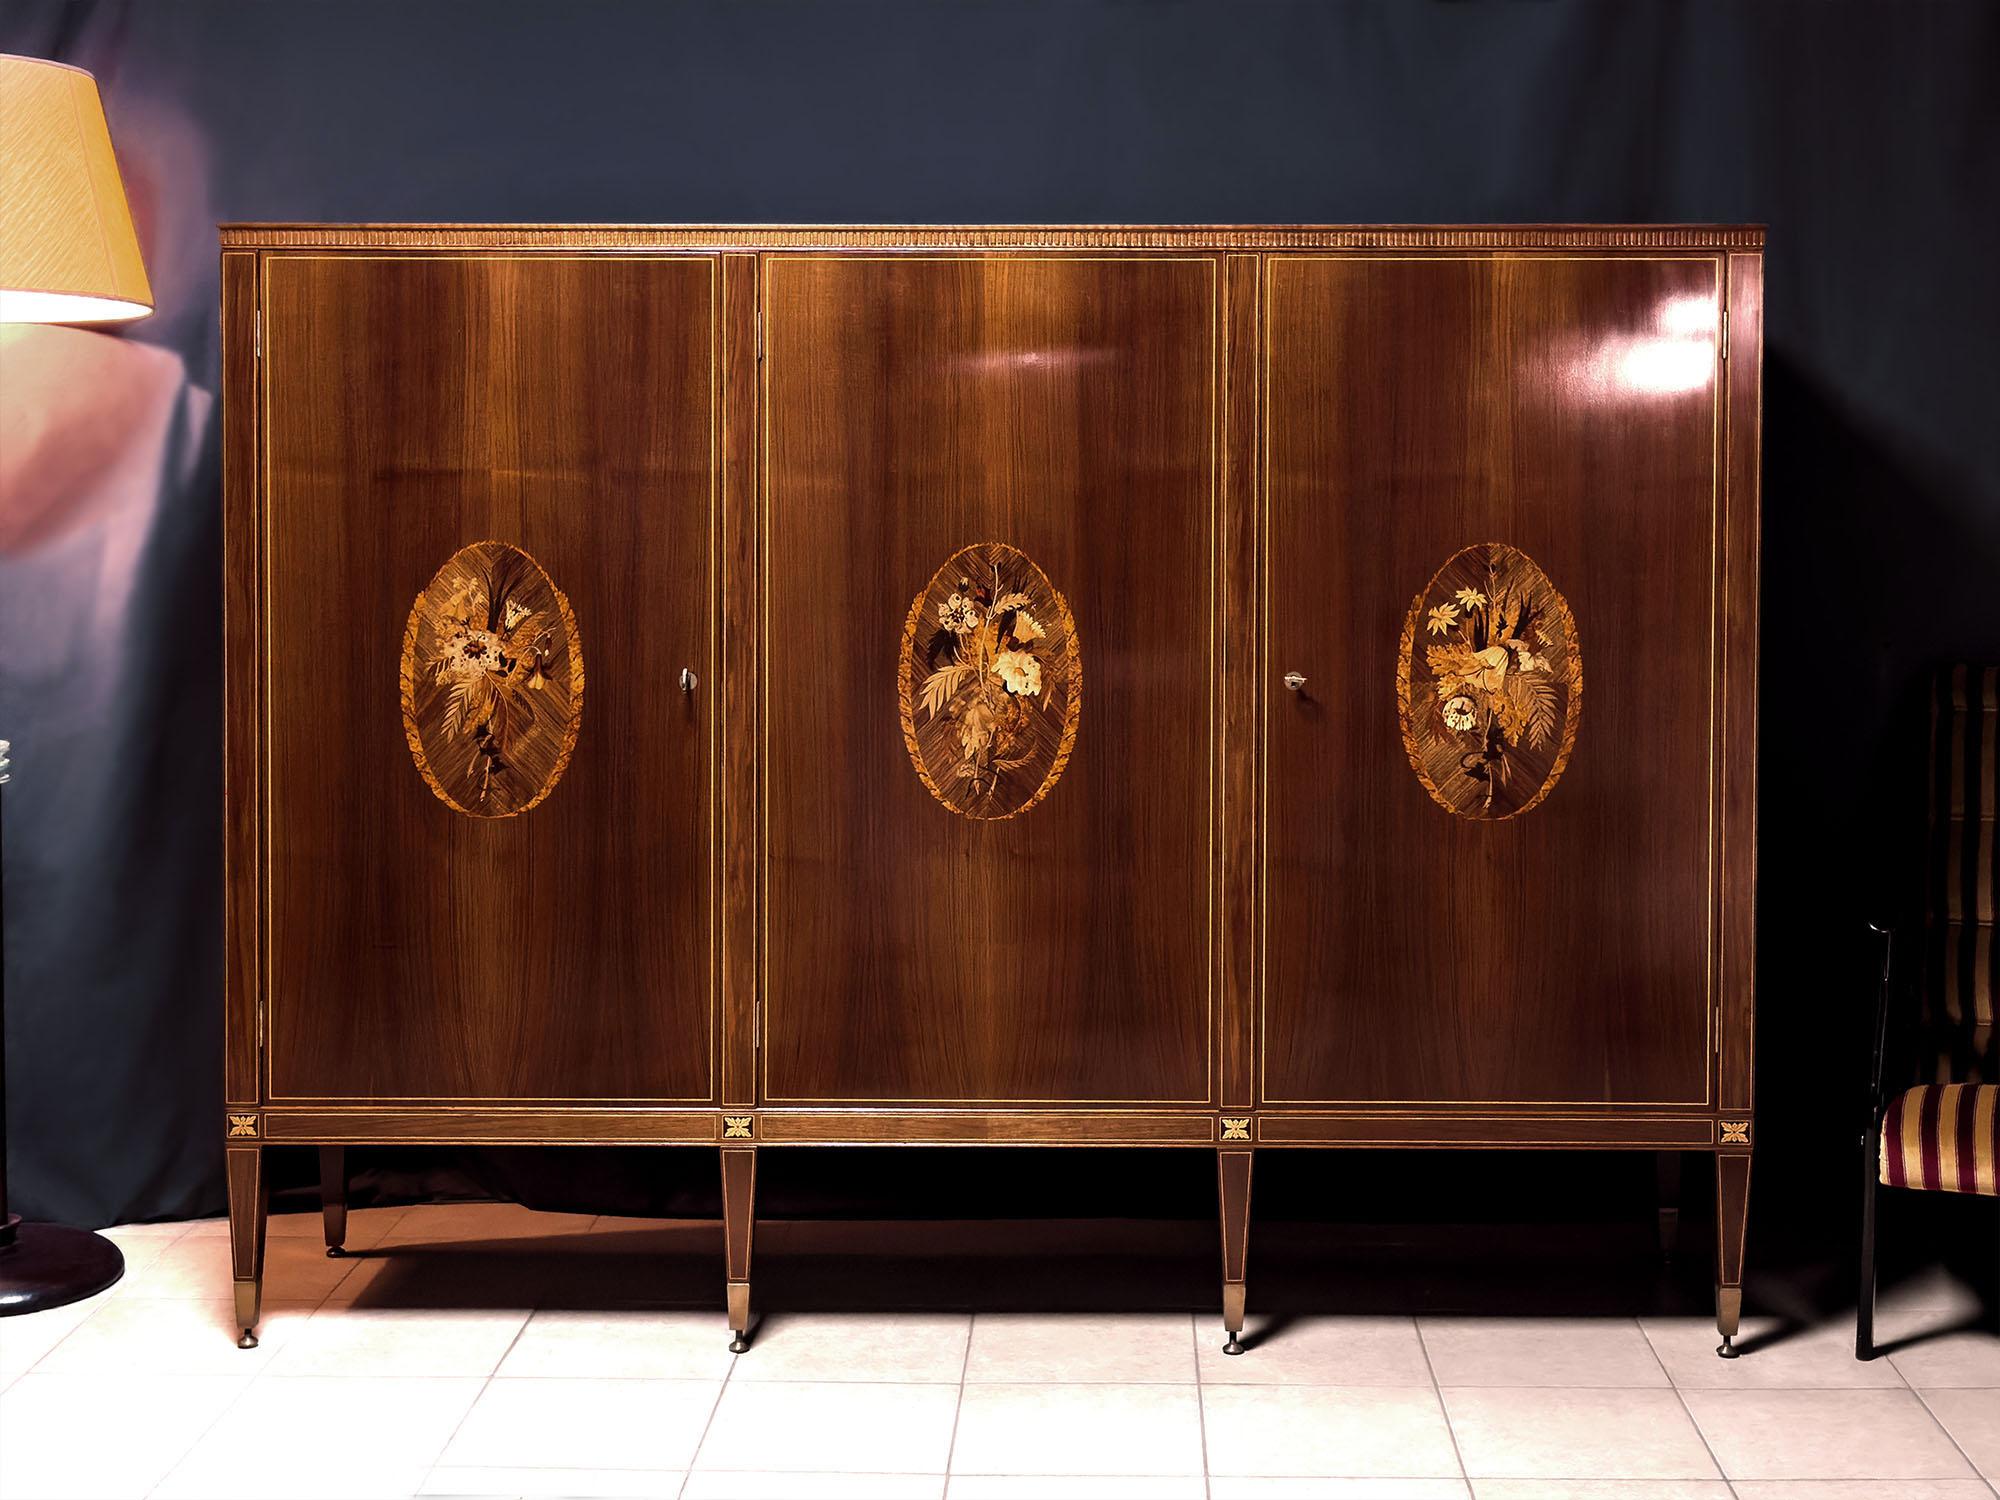 Brass Italian Mid-Century Sideboard with Inlays by Anzani for Marelli & Colico, 1950s For Sale